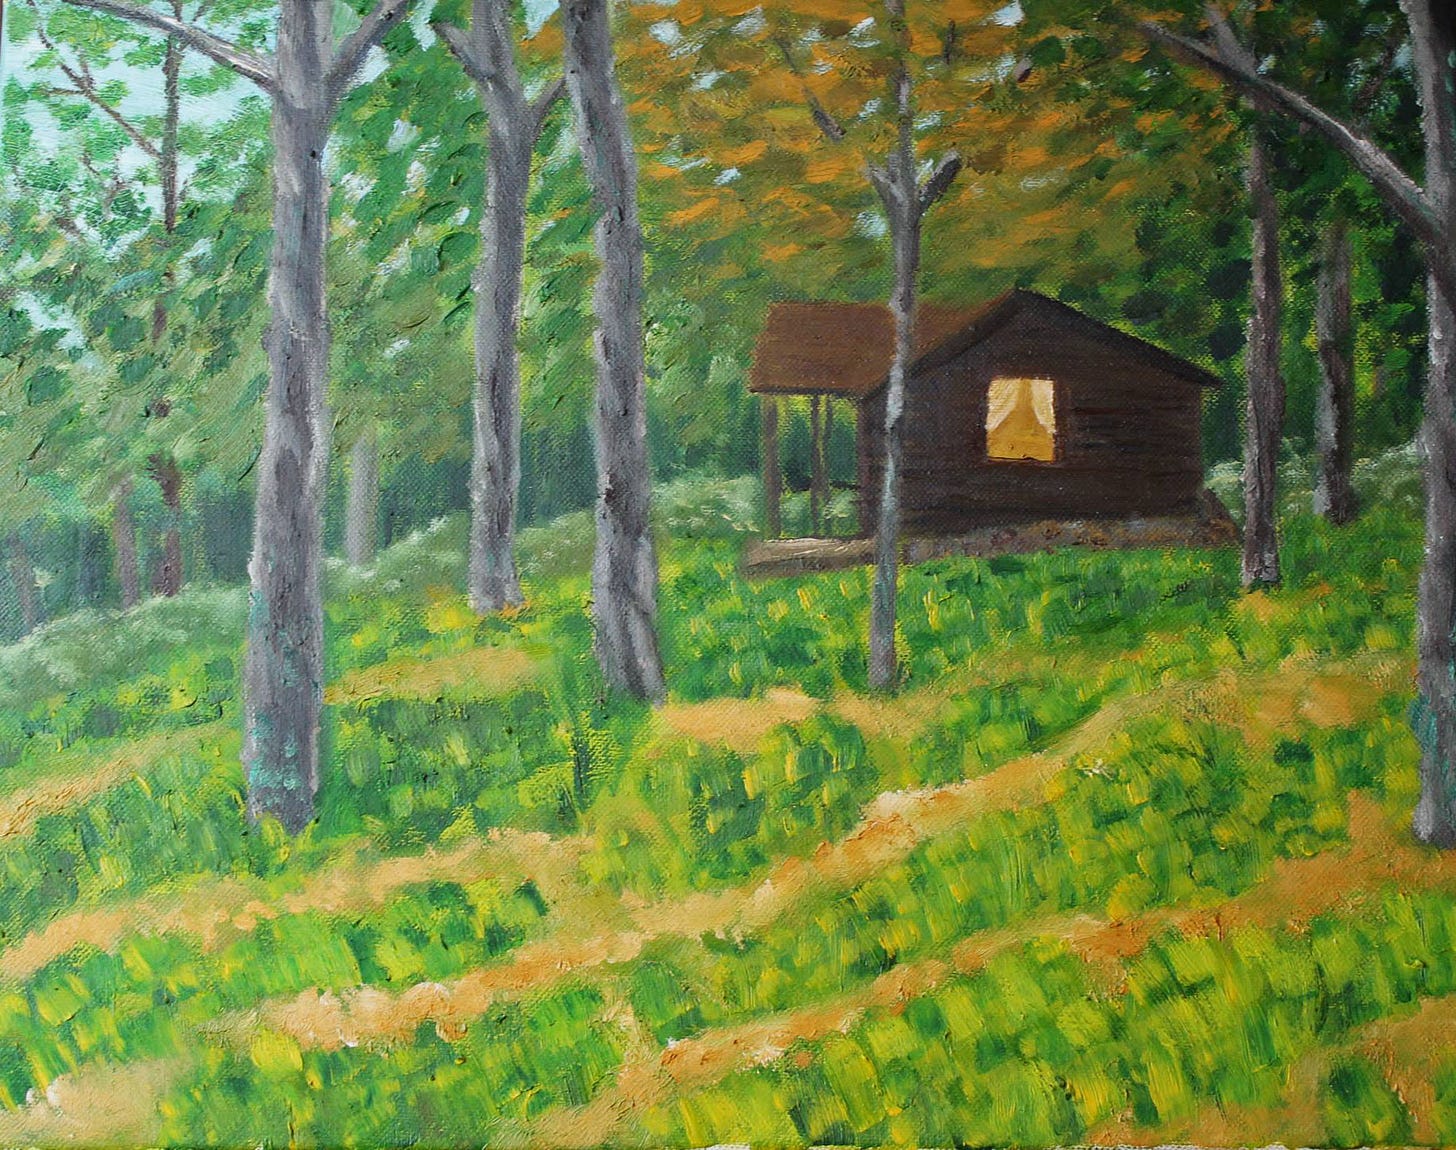 A grove of trees with grass and light-colored soil in front of a wood cabin with an open window